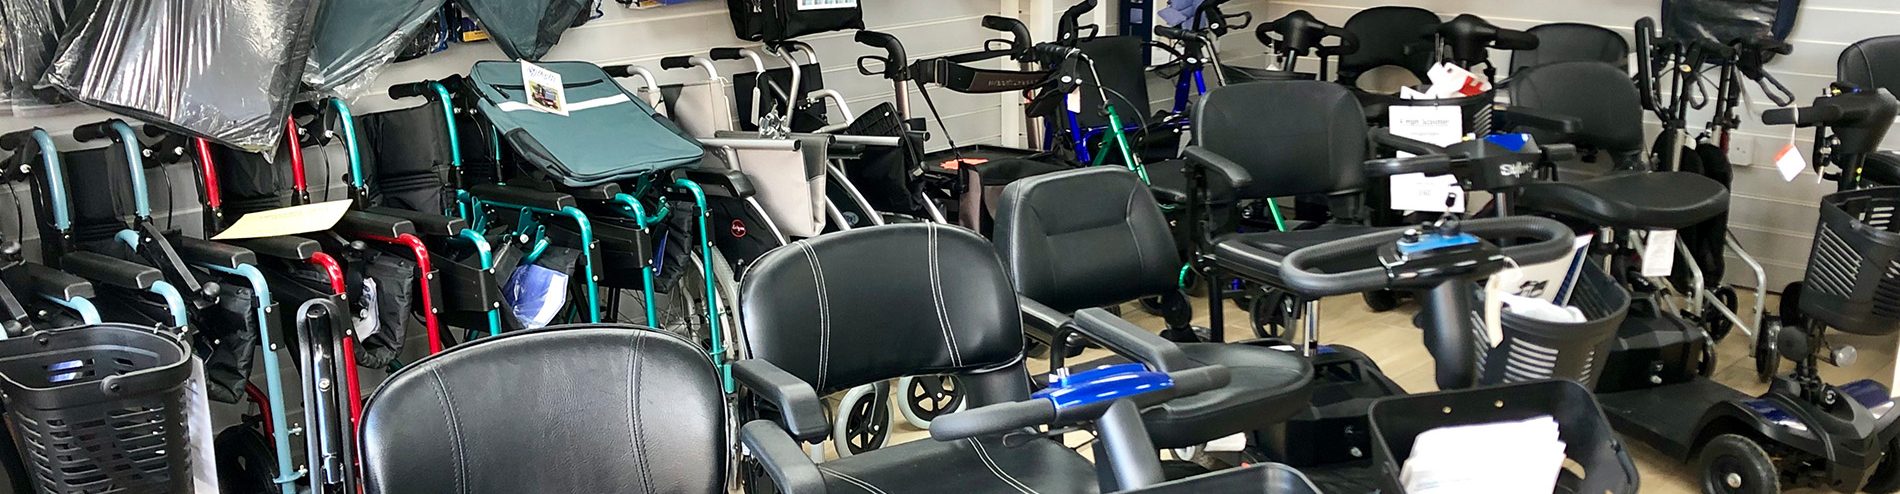 Ward Mobility Scooters and Wheelchairs